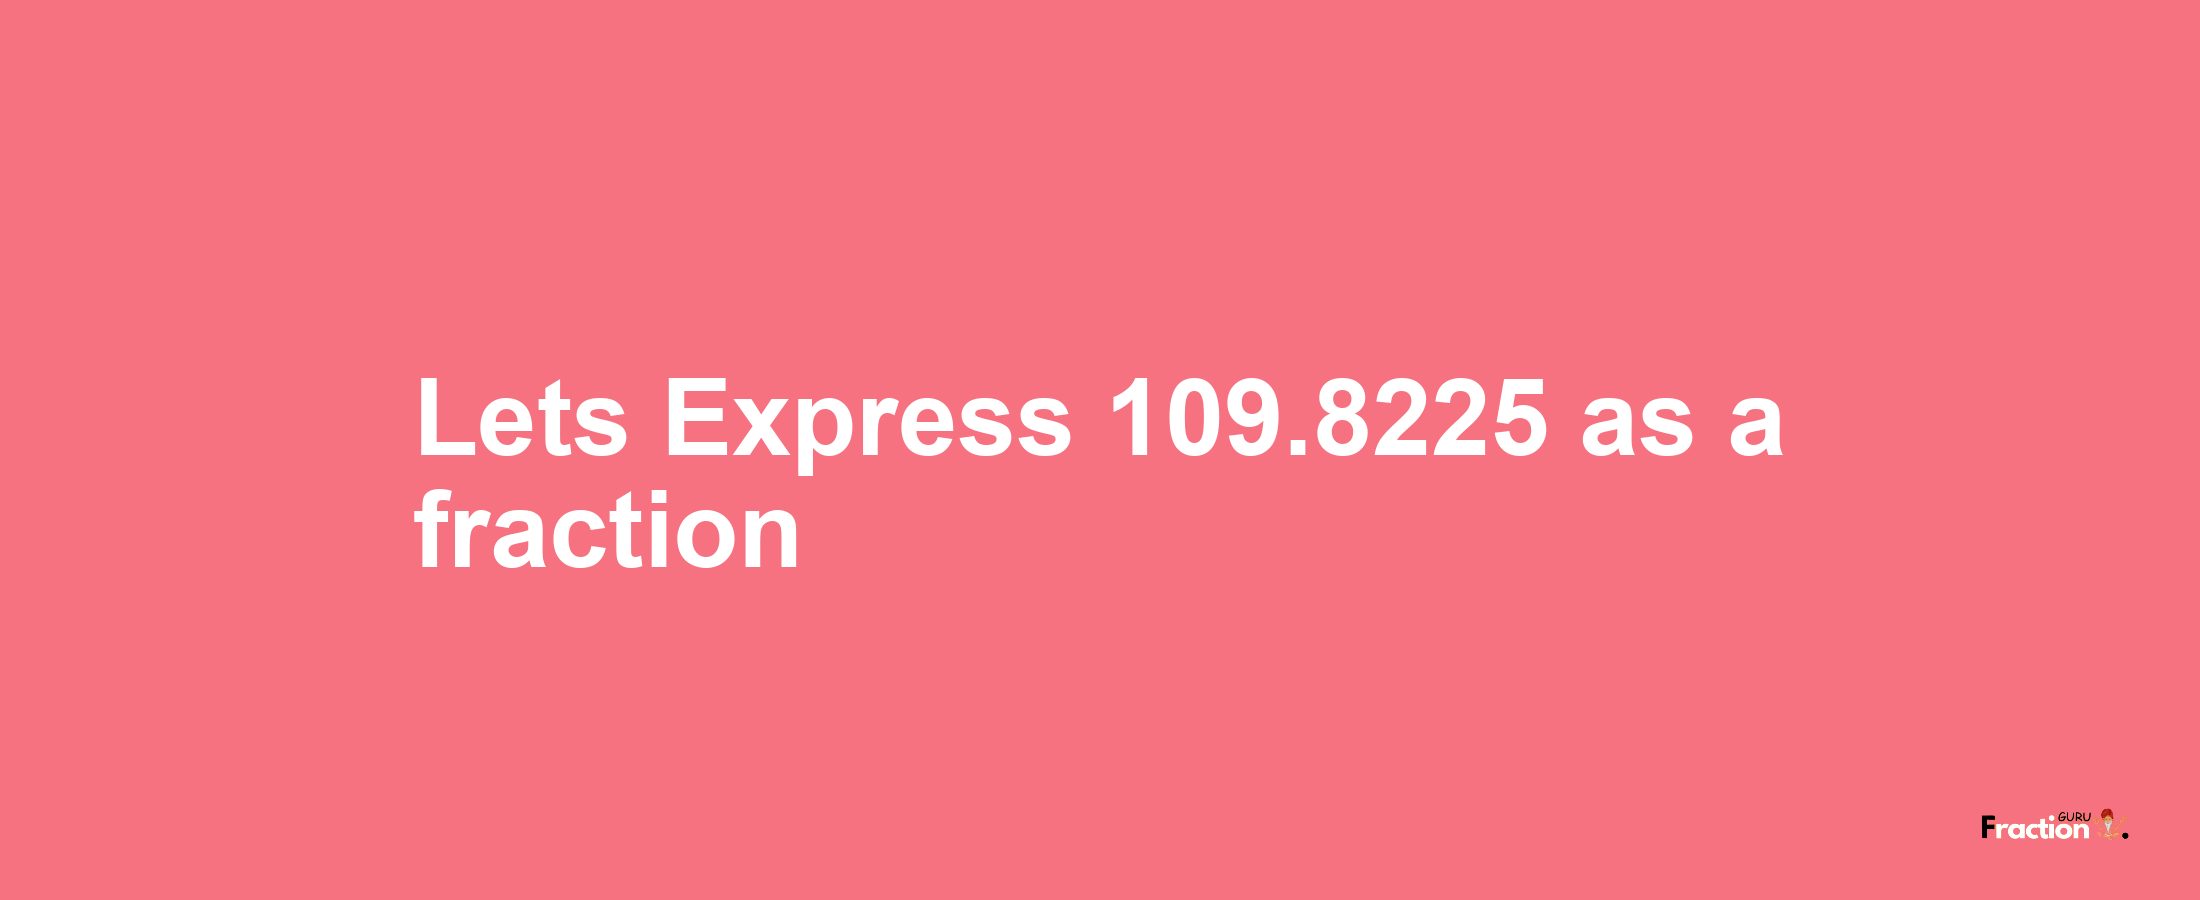 Lets Express 109.8225 as afraction